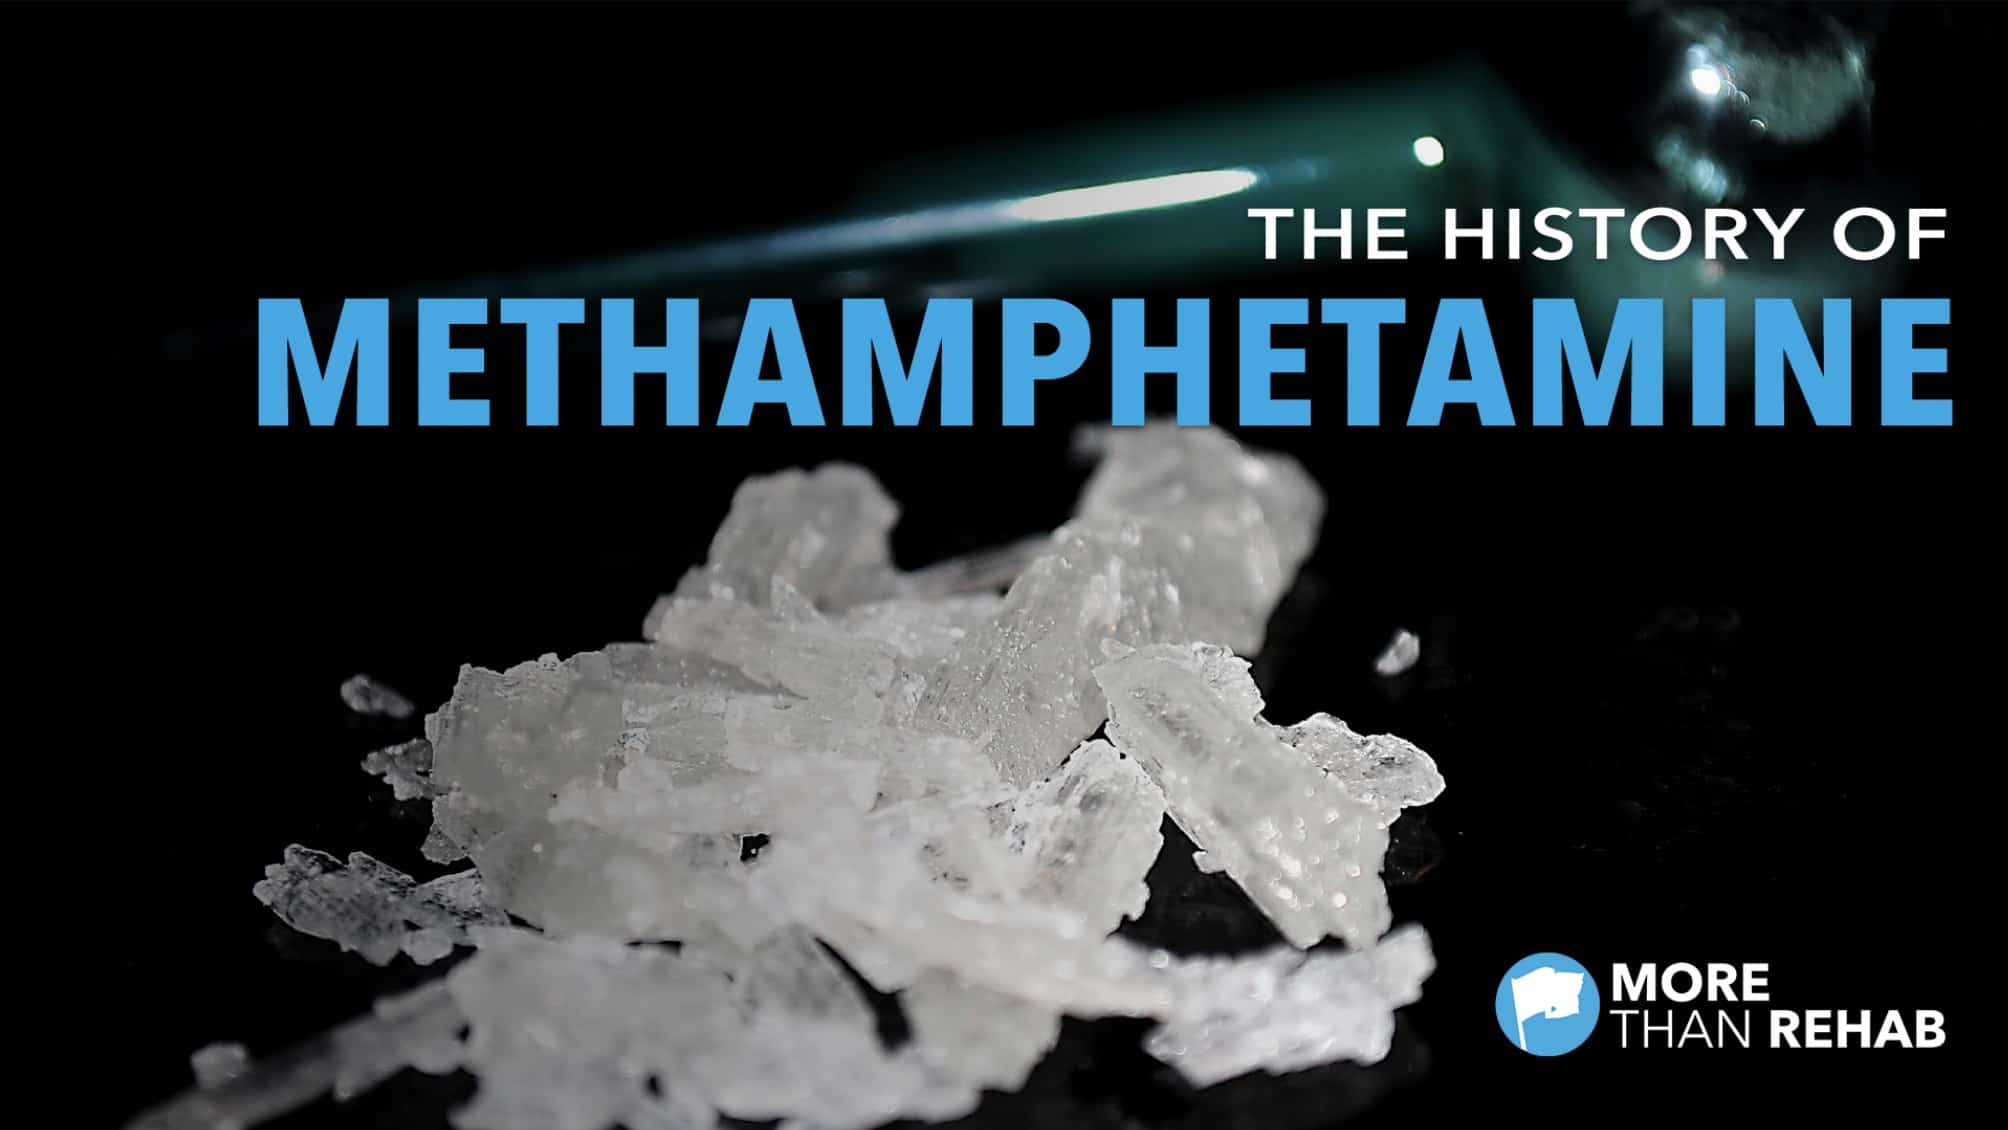 Where Did Meth Come From? A History of Methamphetamine